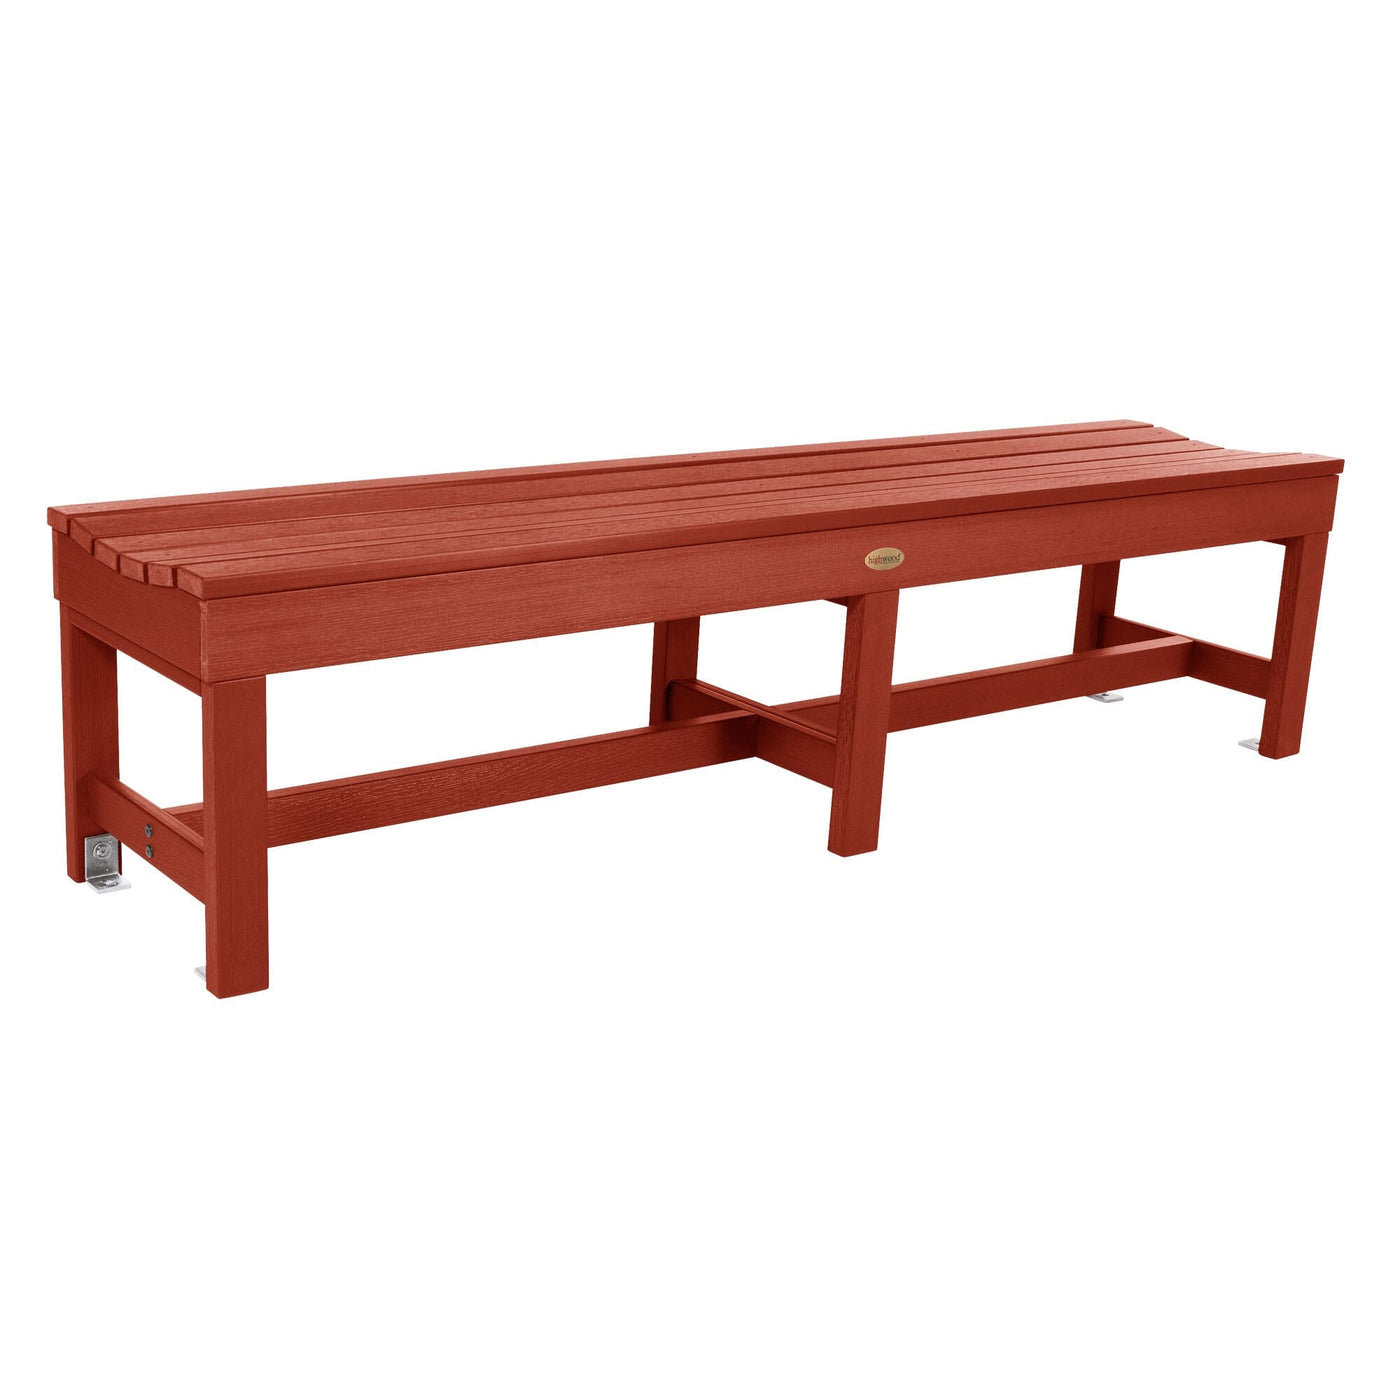 Lehigh Picnic Bench - 6ft Bench Highwood USA Rustic Red 